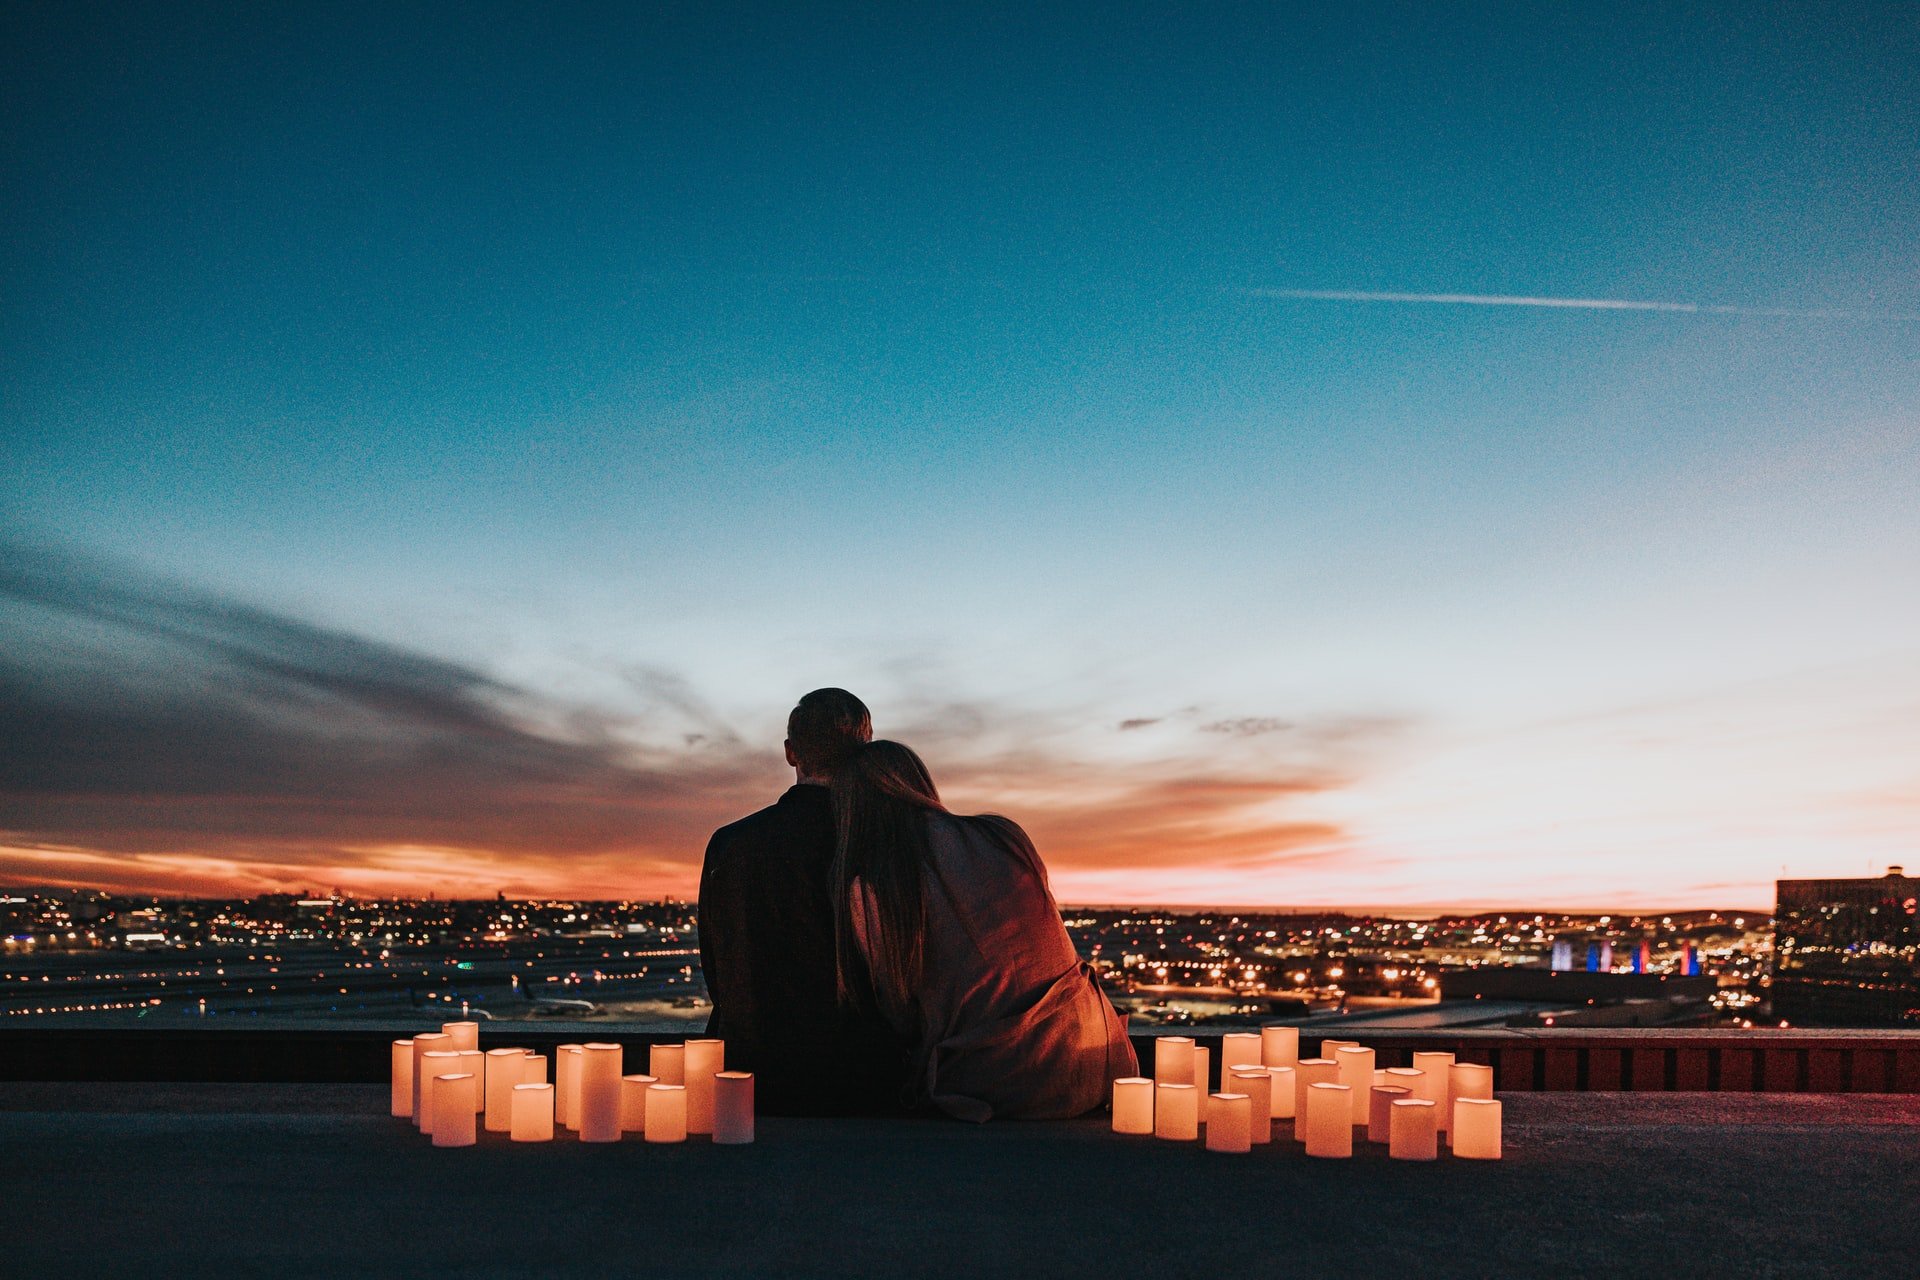 couple sits in the middle of candles overlooking city, leaning into each other, full of love, perfect moment captured